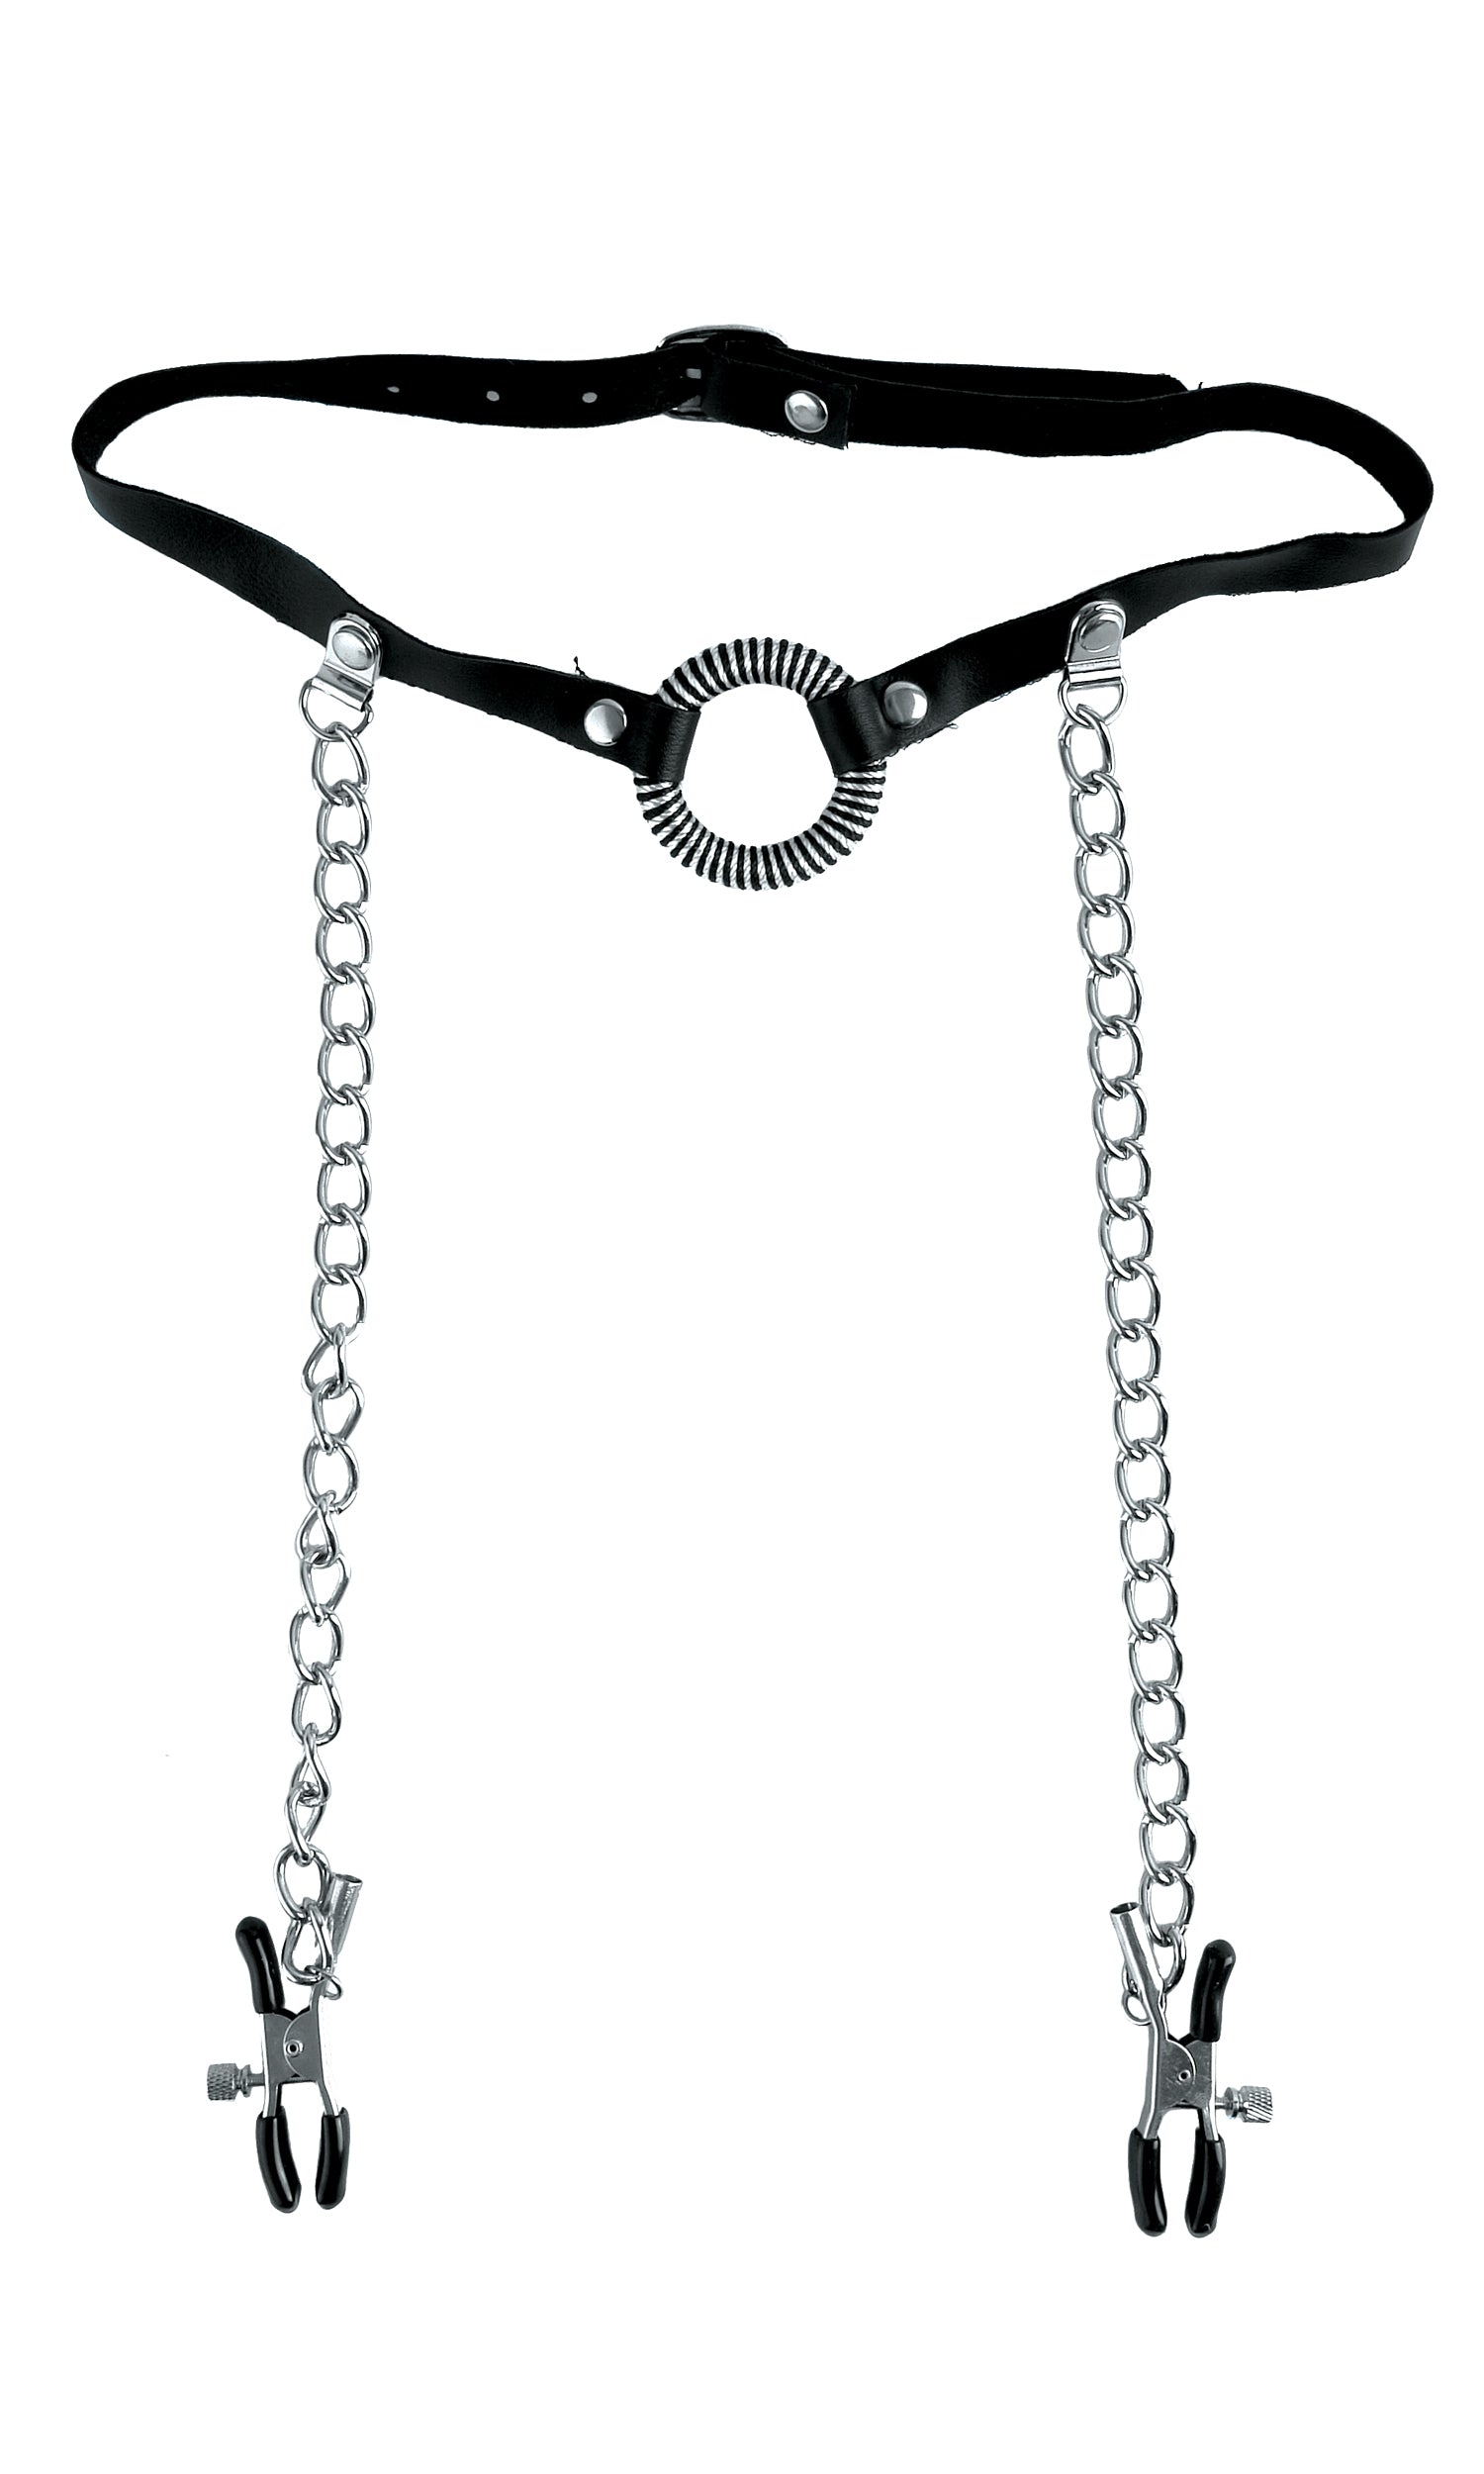 Fetish Fantasy O-Ring Gag with Nipple Clamps for Erotic Play